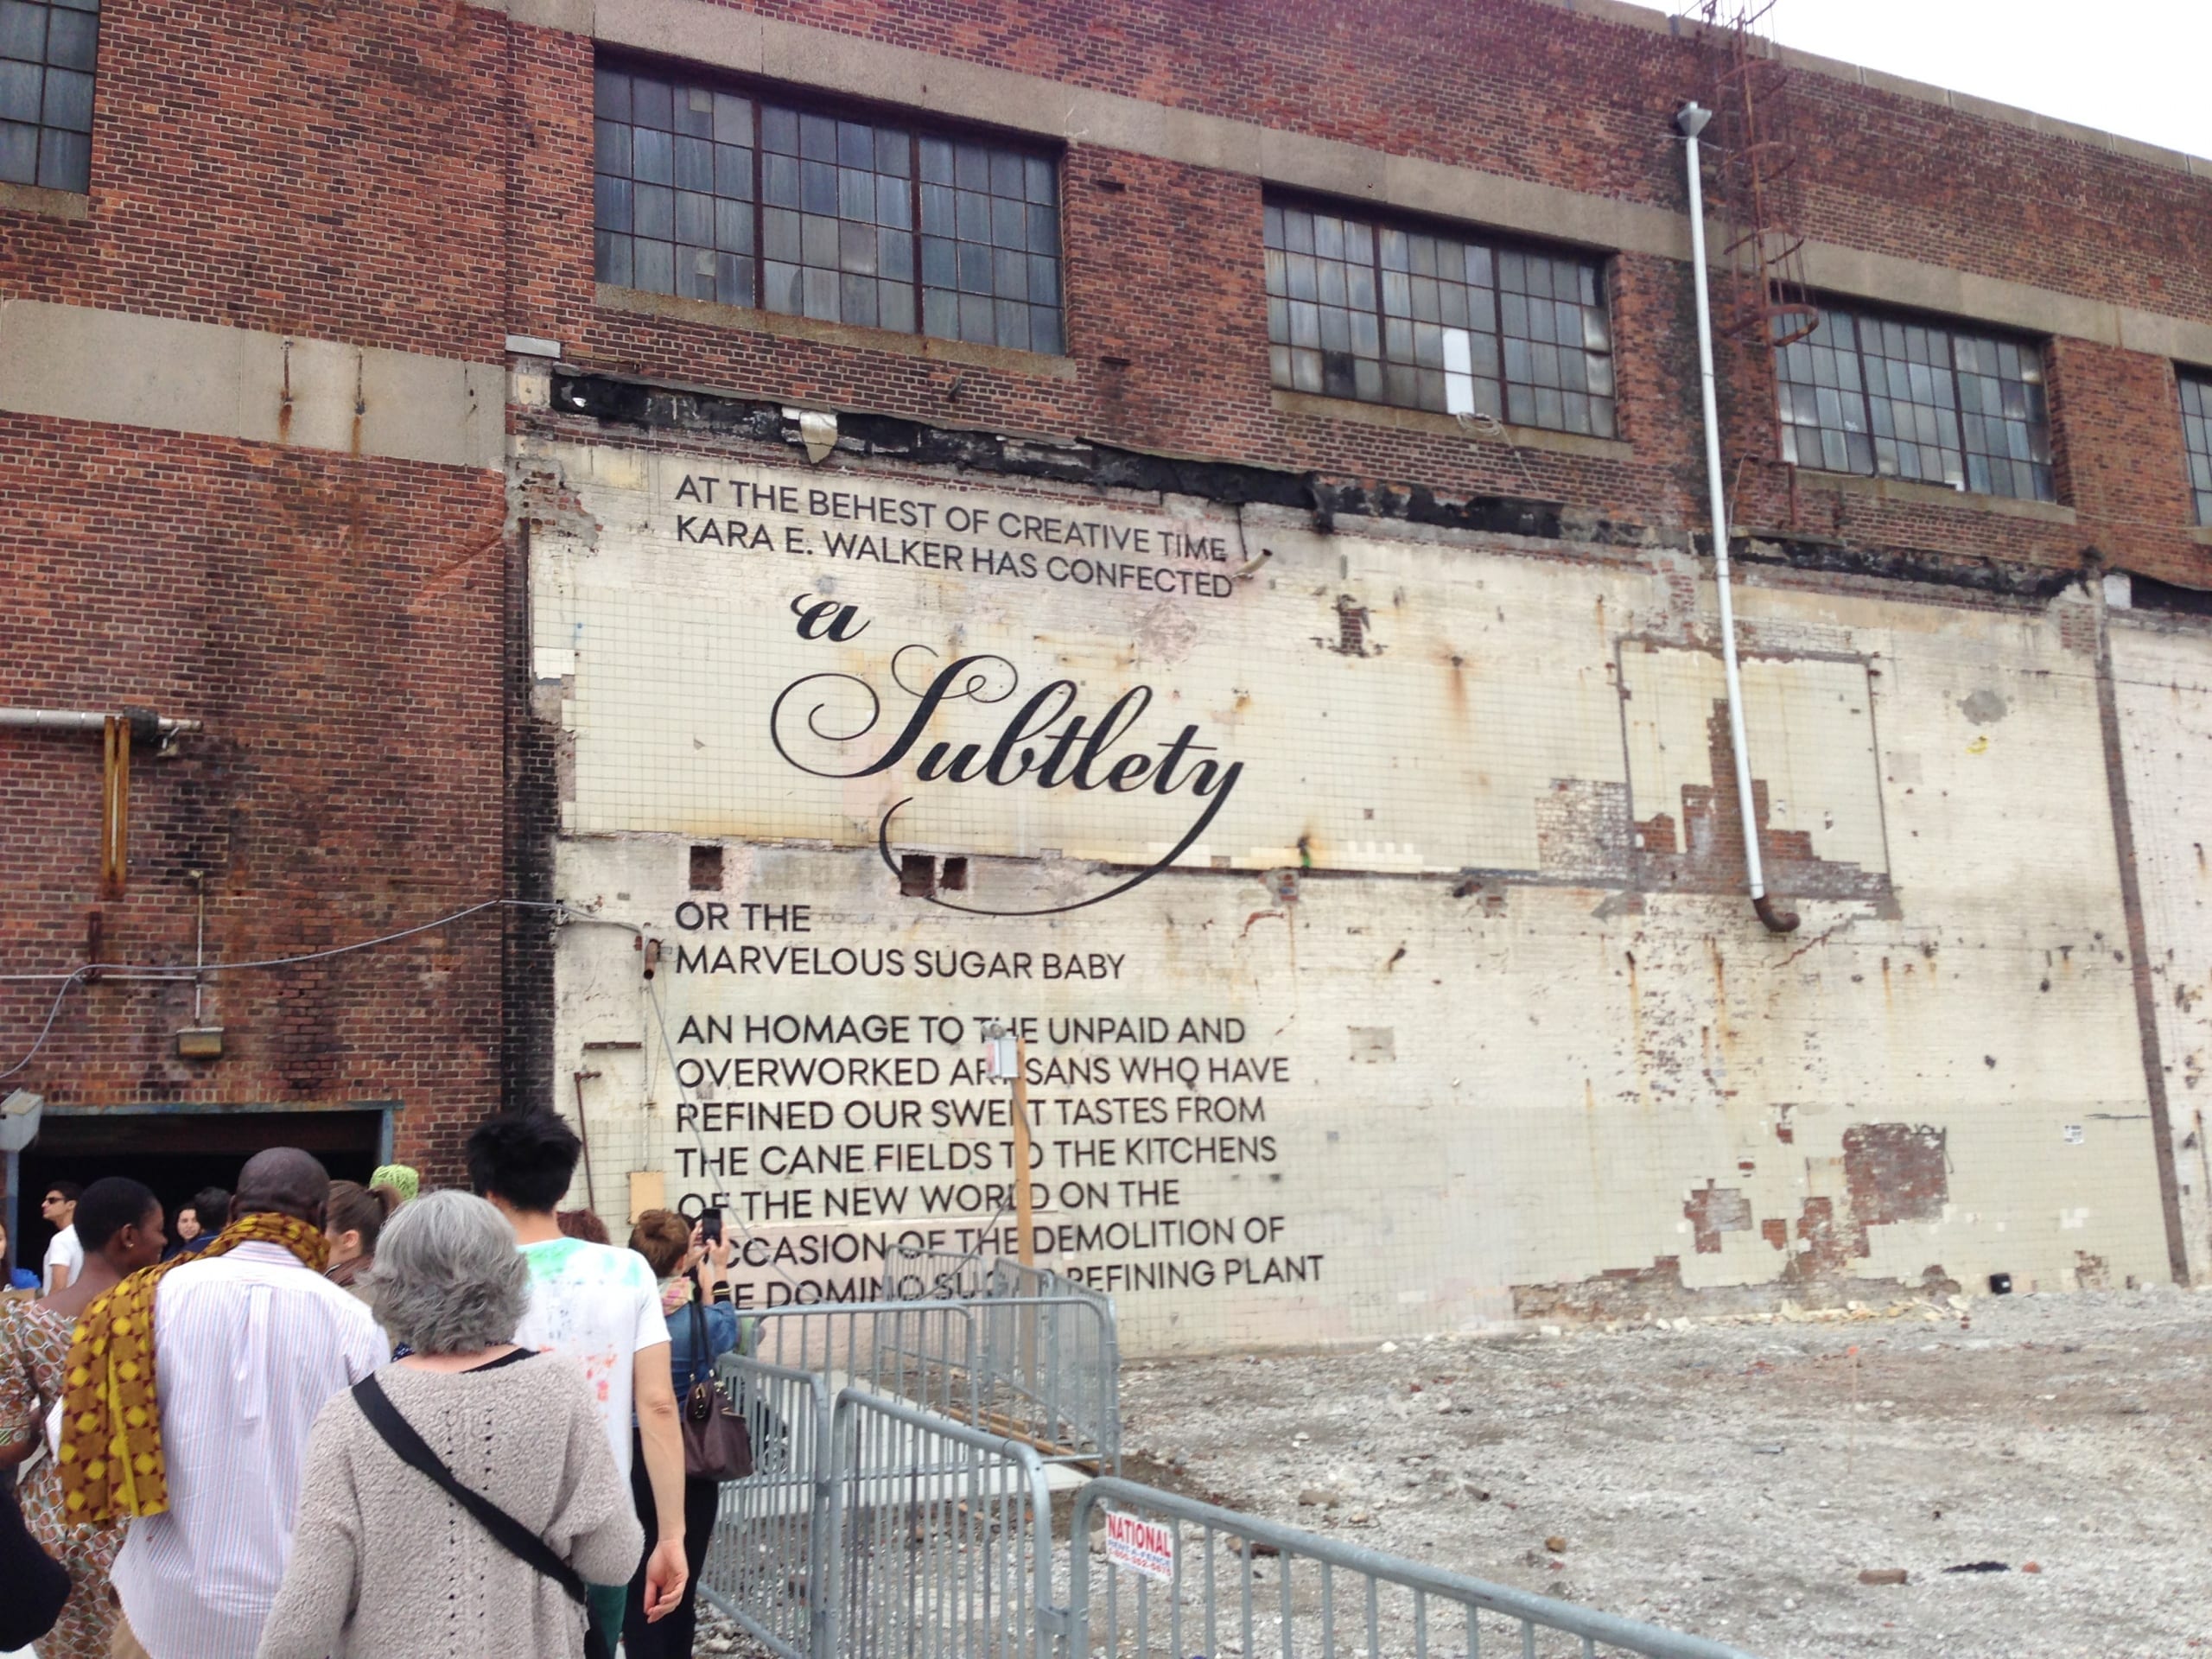 "A Subtlety" printed onto red brick walls of a factory